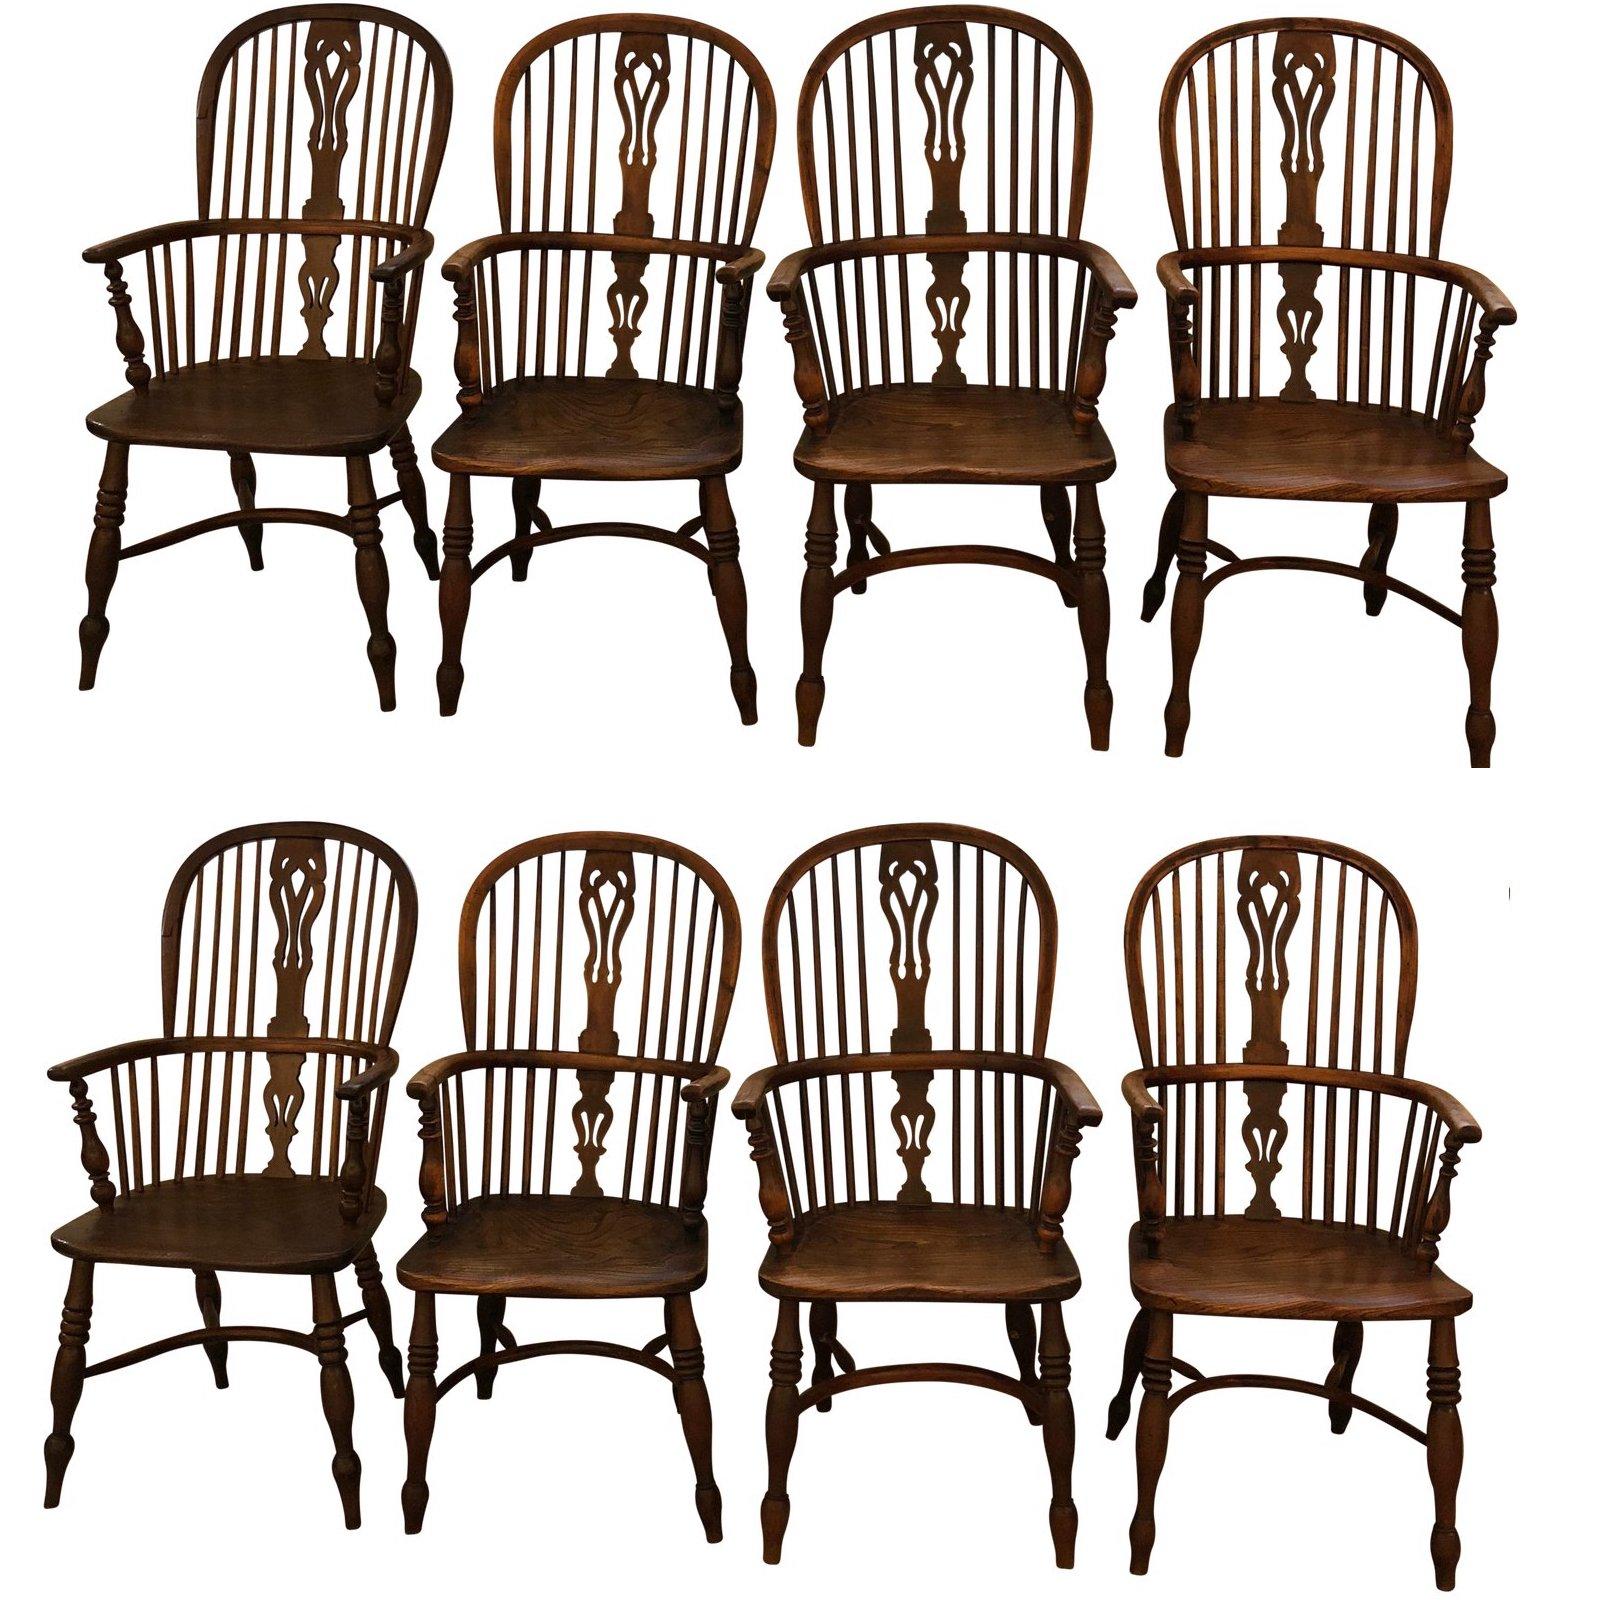 Set of 8 Late 18th-Early 19th Century Yew Wood Dining Chairs